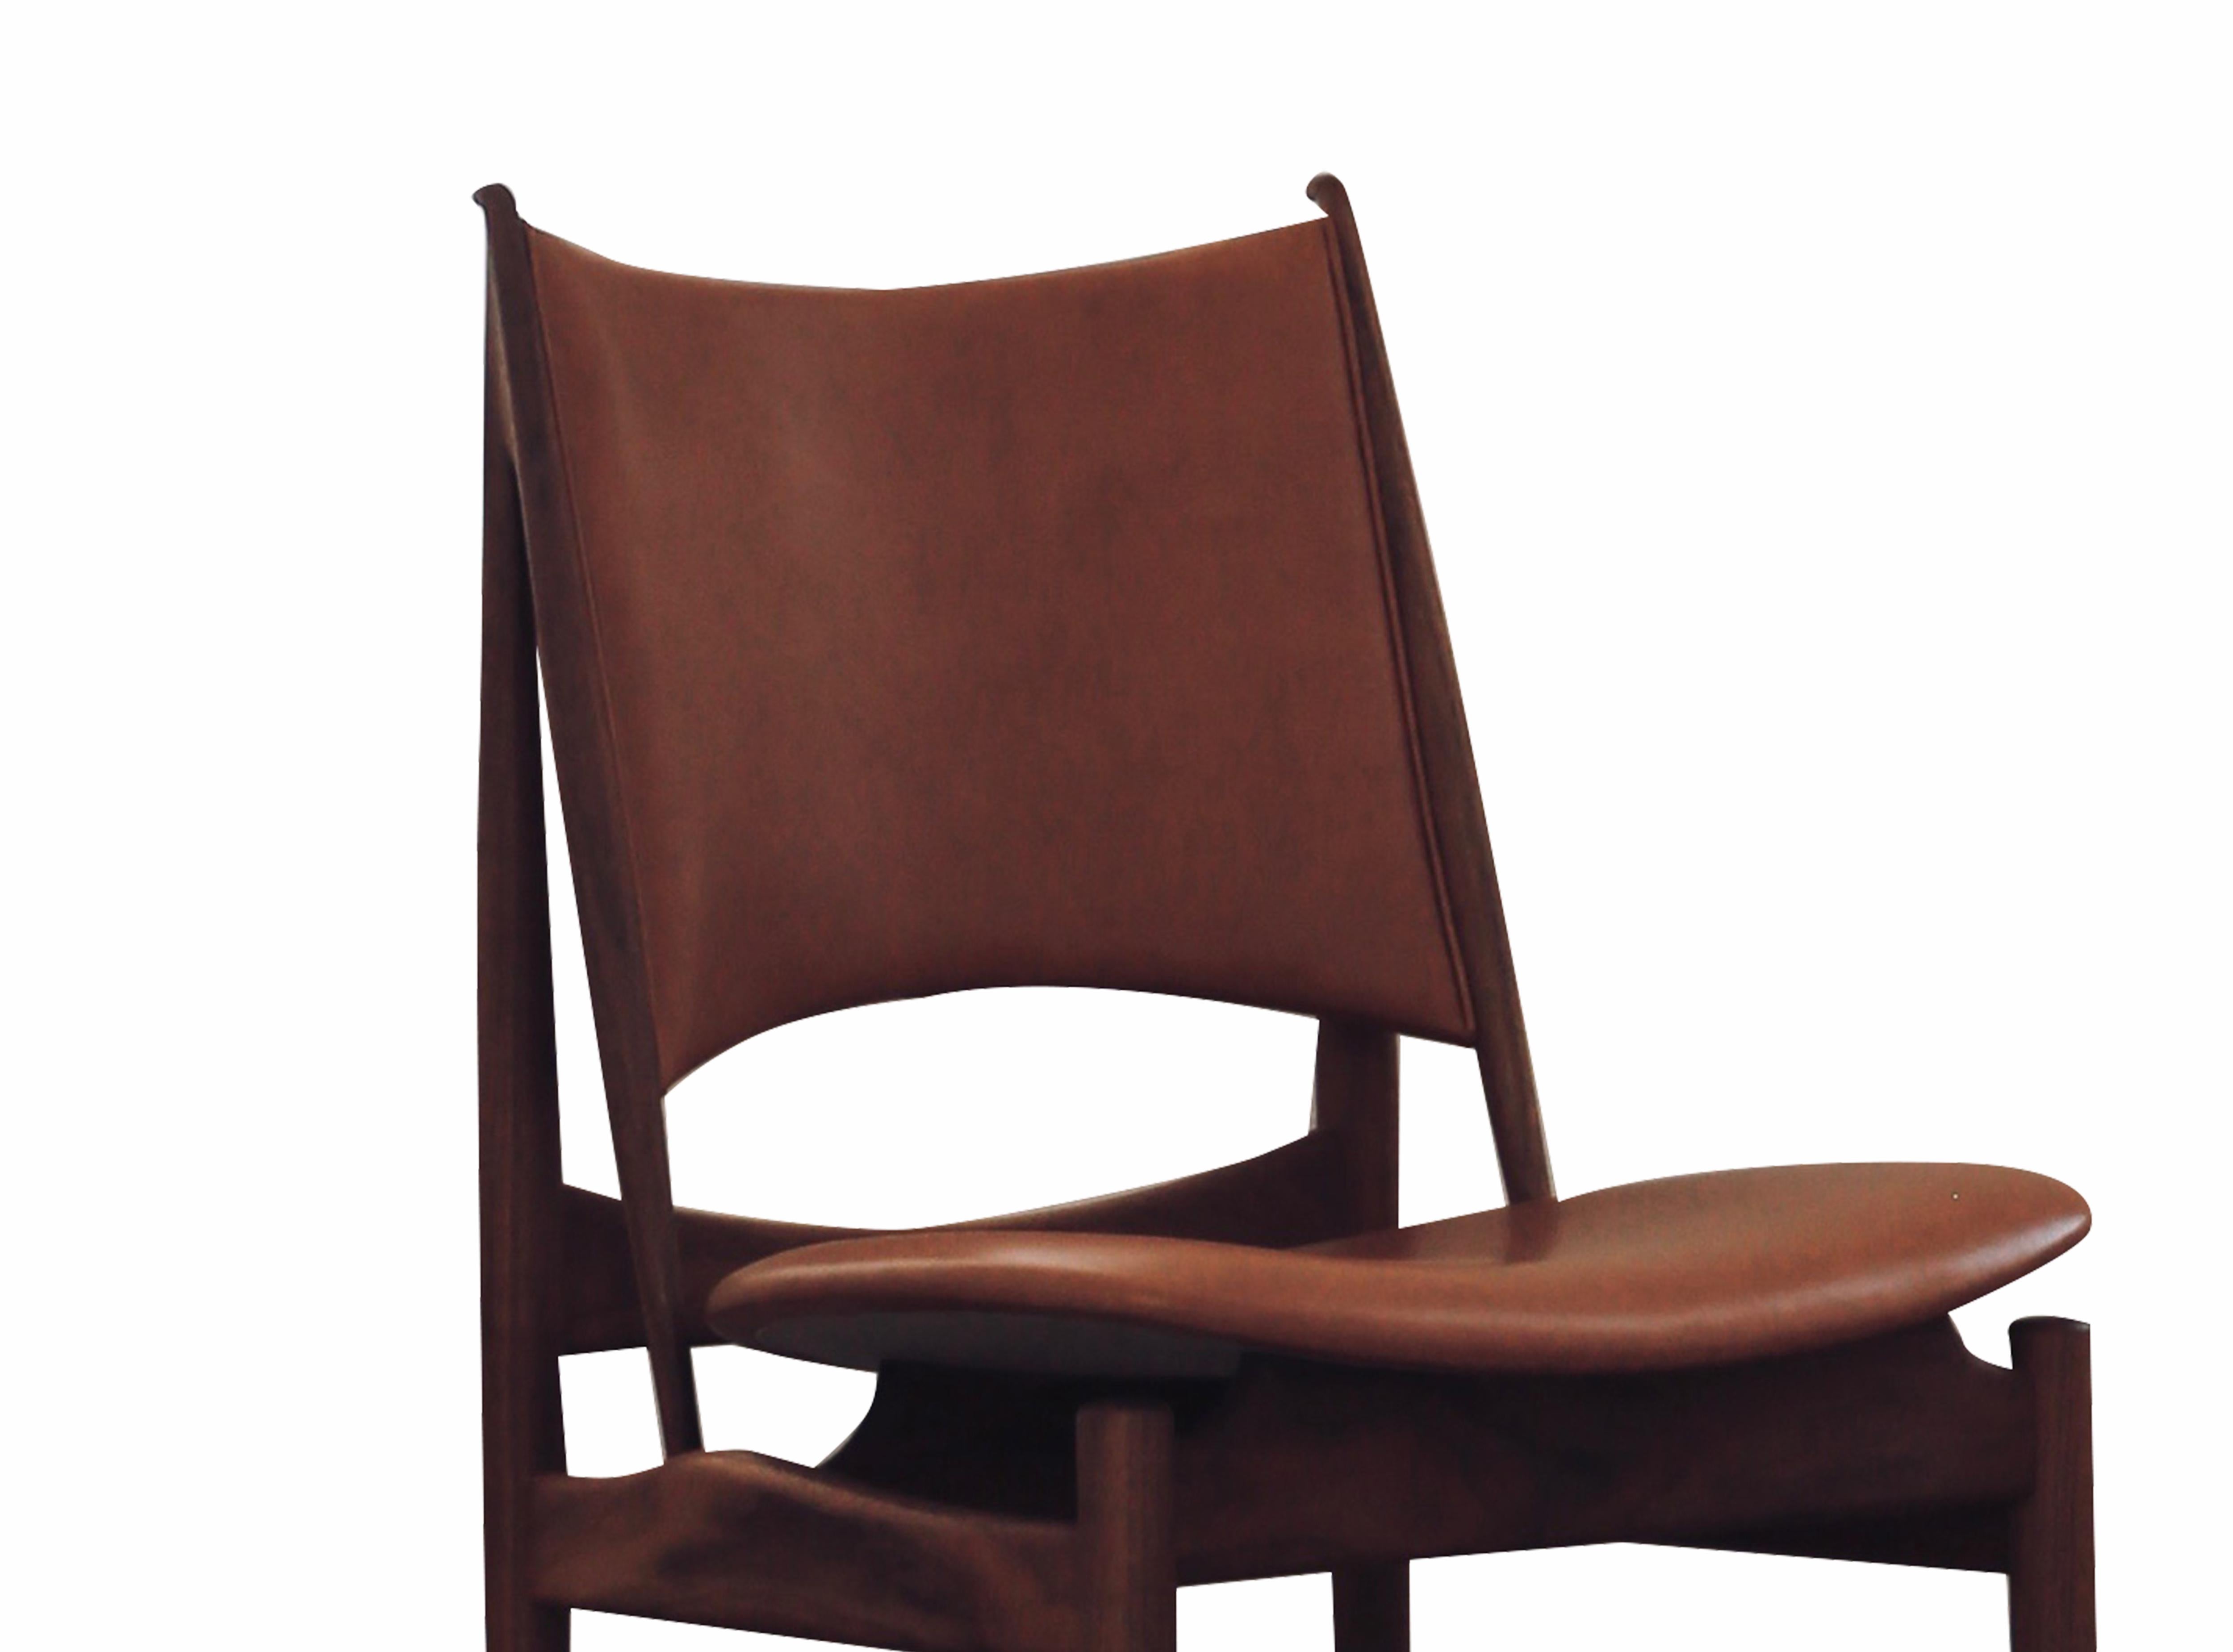 Armchair designed by Finn Juhl in 1949, relaunched in 2014.
Manufactured by House of Finn Juhl in Denmark.

Design critics have described Finn Juhl’s Egyptian chair as a miraculous mix of ancient Egyptian design principles, modern rhythms and